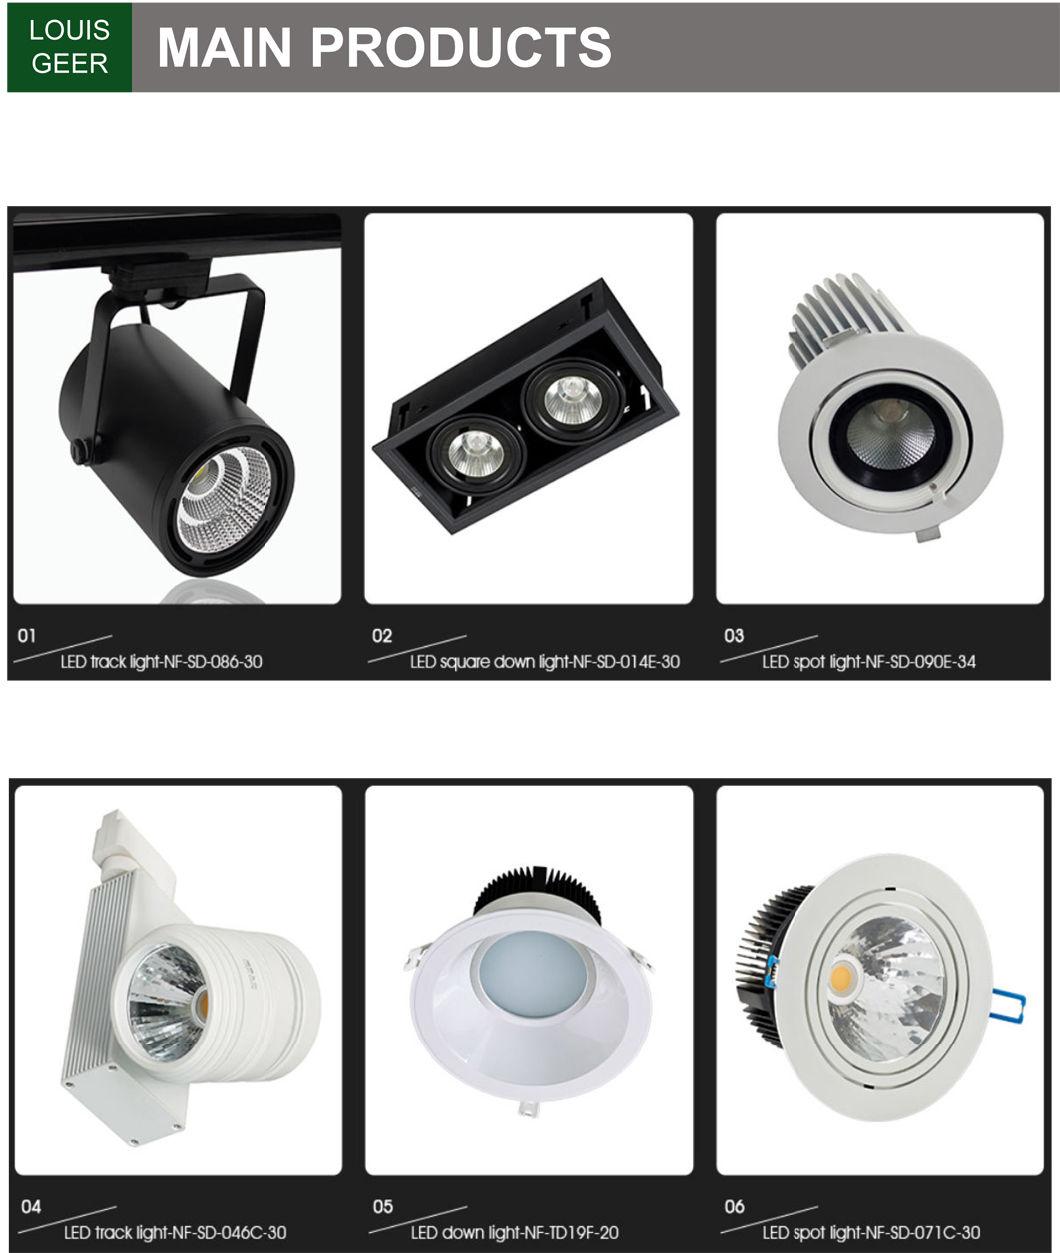 Louis Geer Ce LED Downlight Double Head Square LED Ceiling Light Grille Light for Commercial